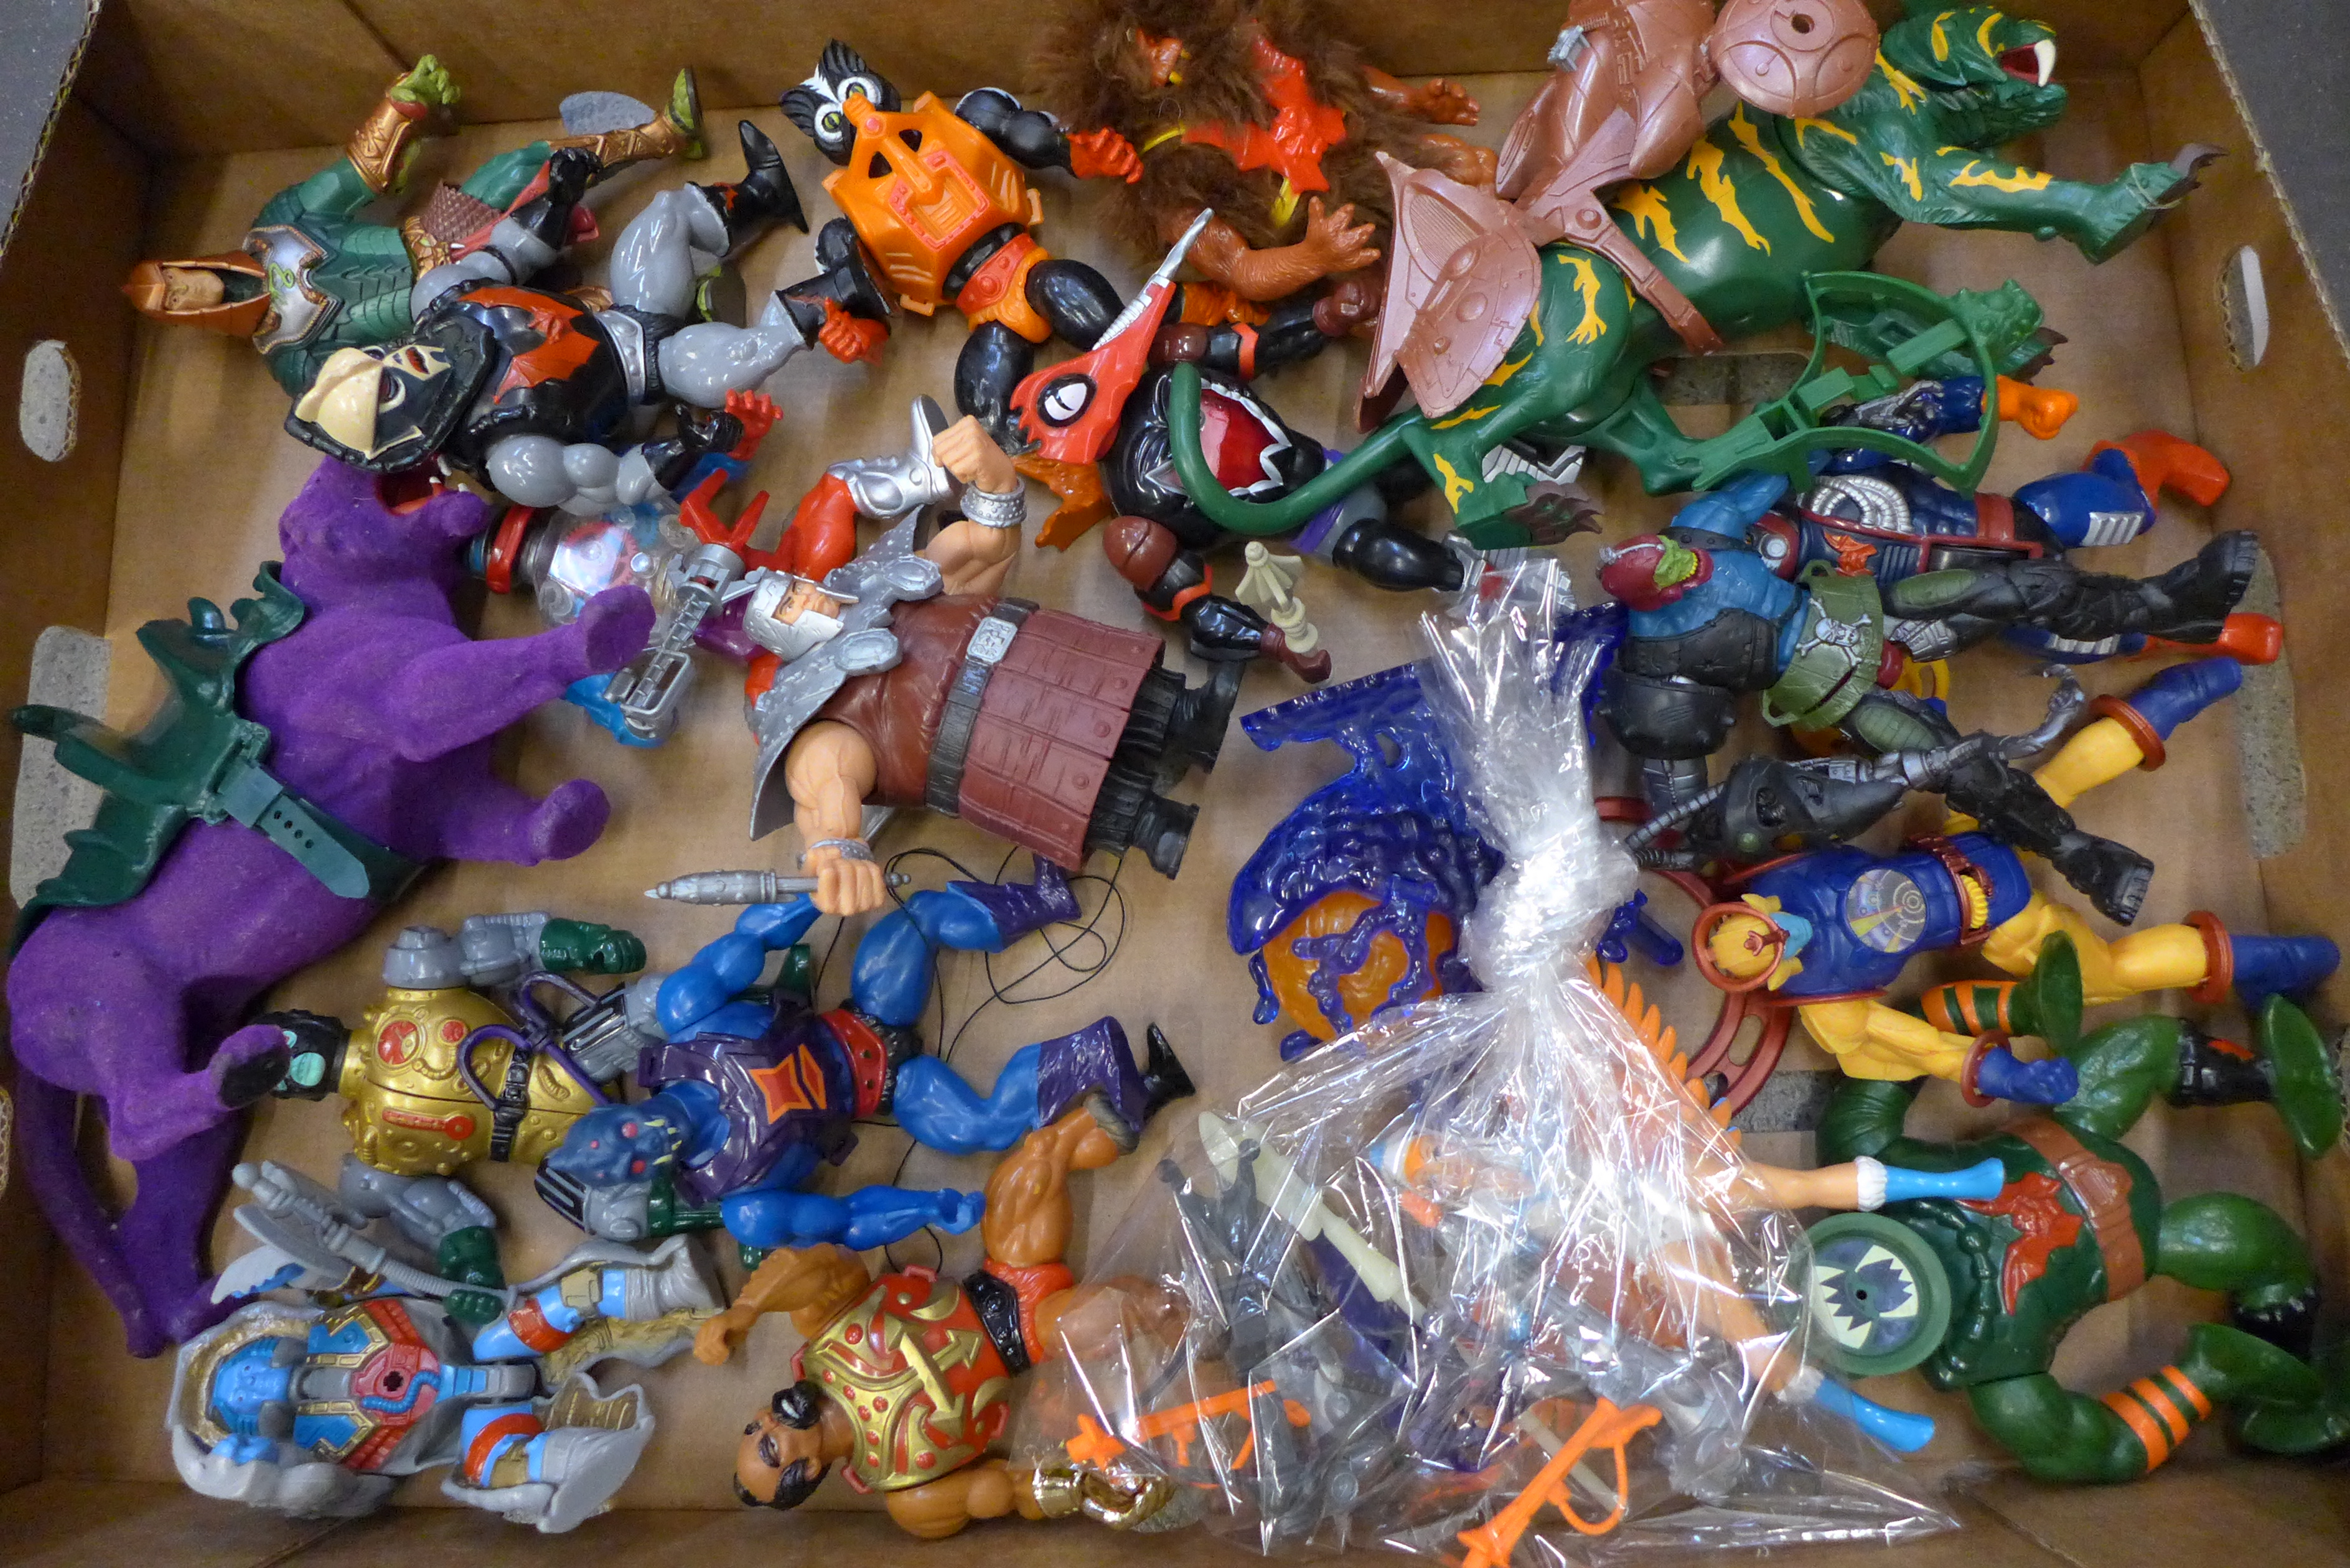 A collection of nineteen original Mattel He-Man/Masters of the Universe articulated figures from the